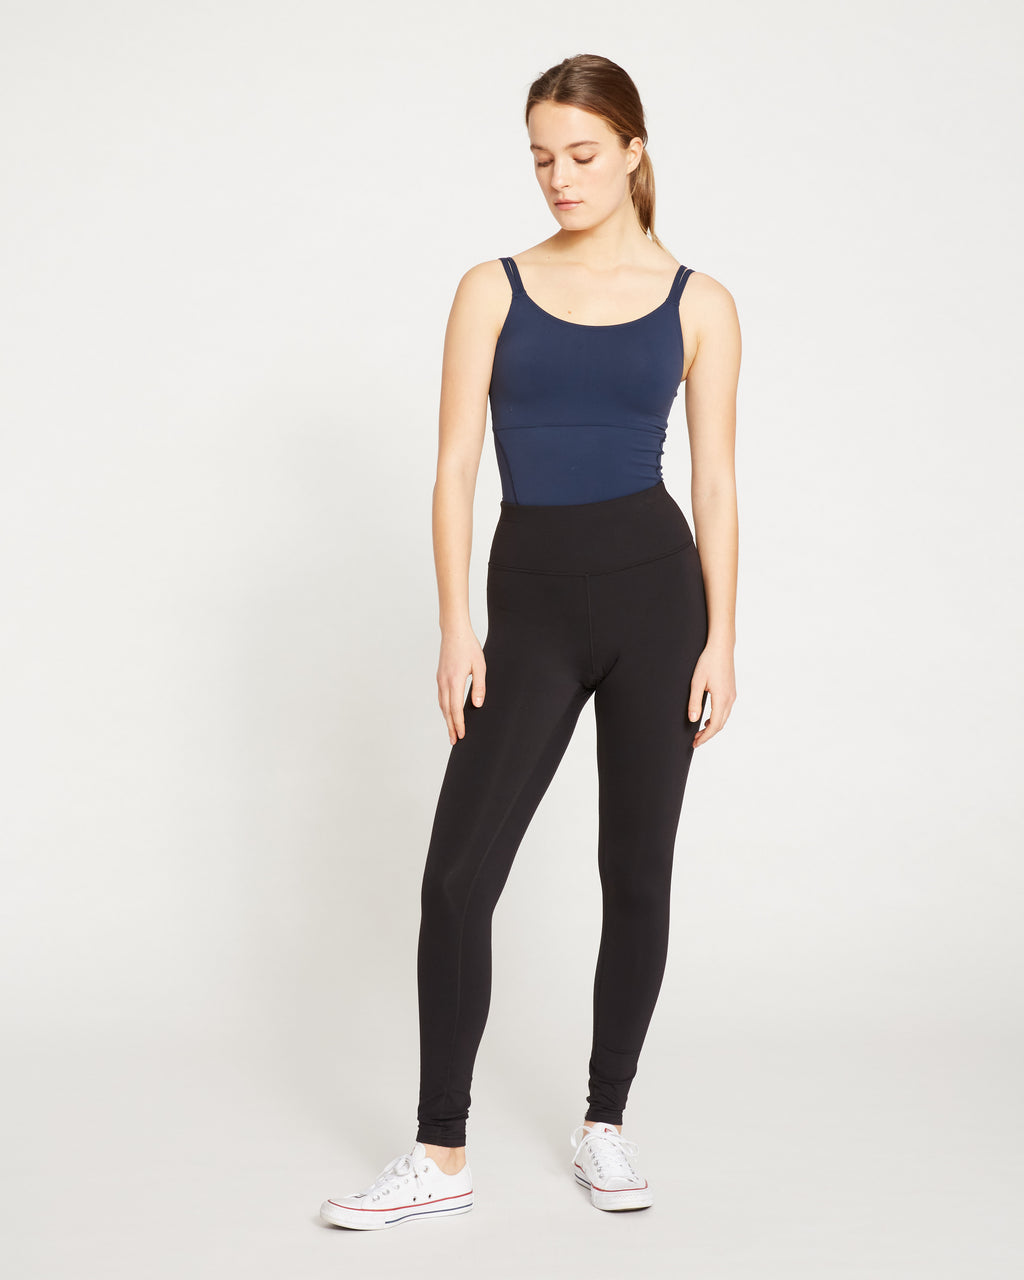 Athleisure Wear - Women's Activewear Outfits